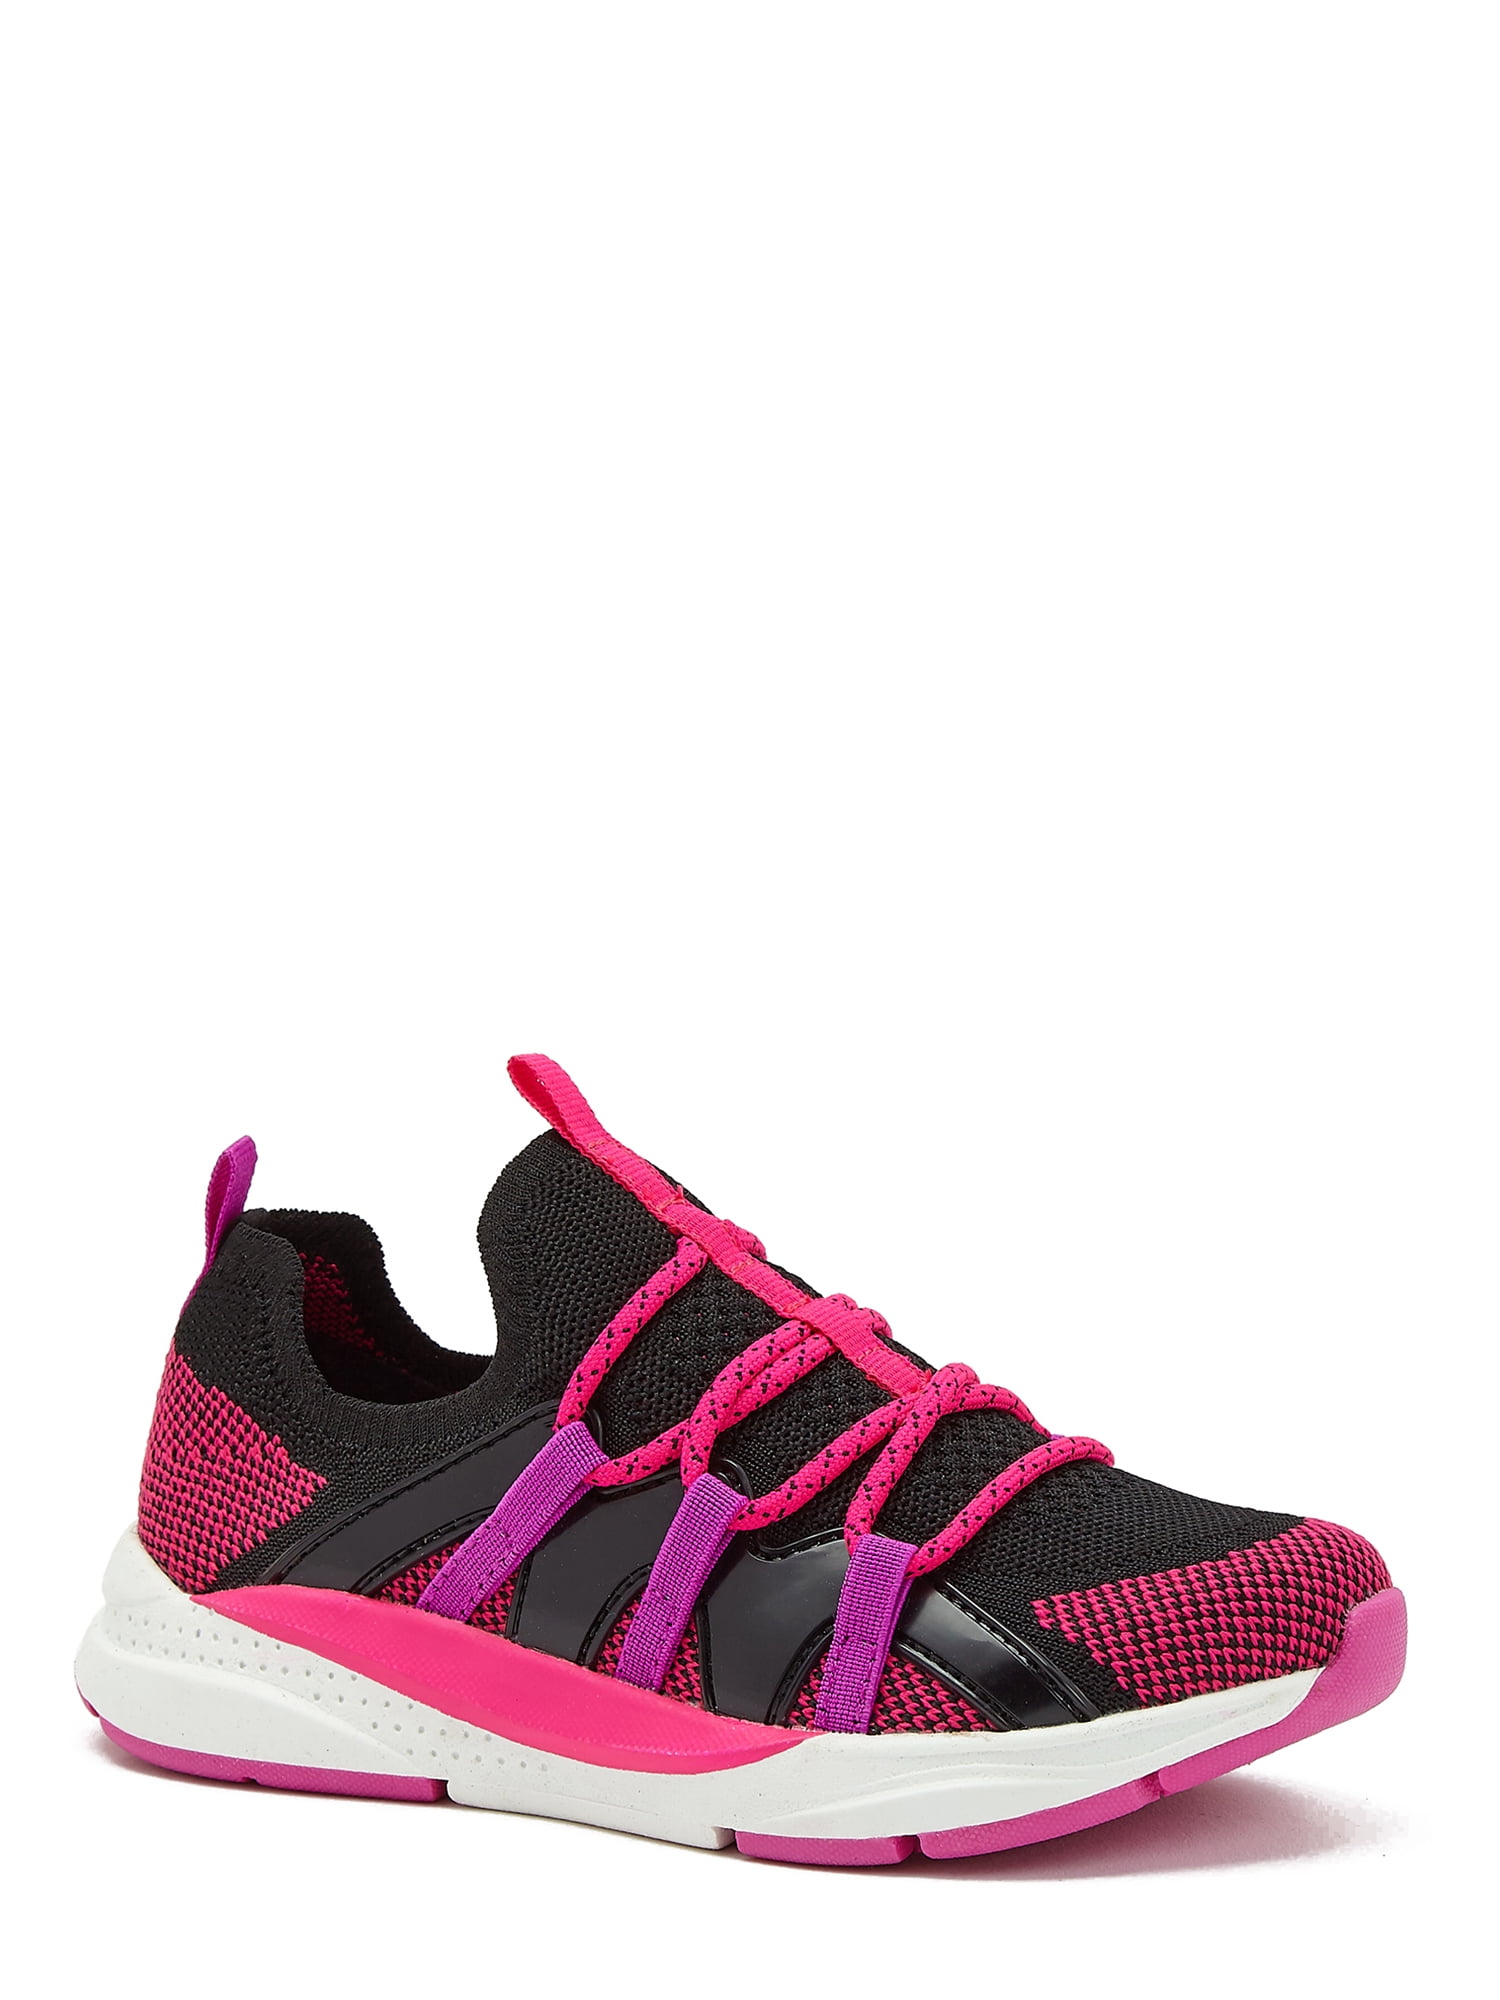 Athletic Works Little Girl & Big Girl Knit Cage Sneaker, Sizes 13-6